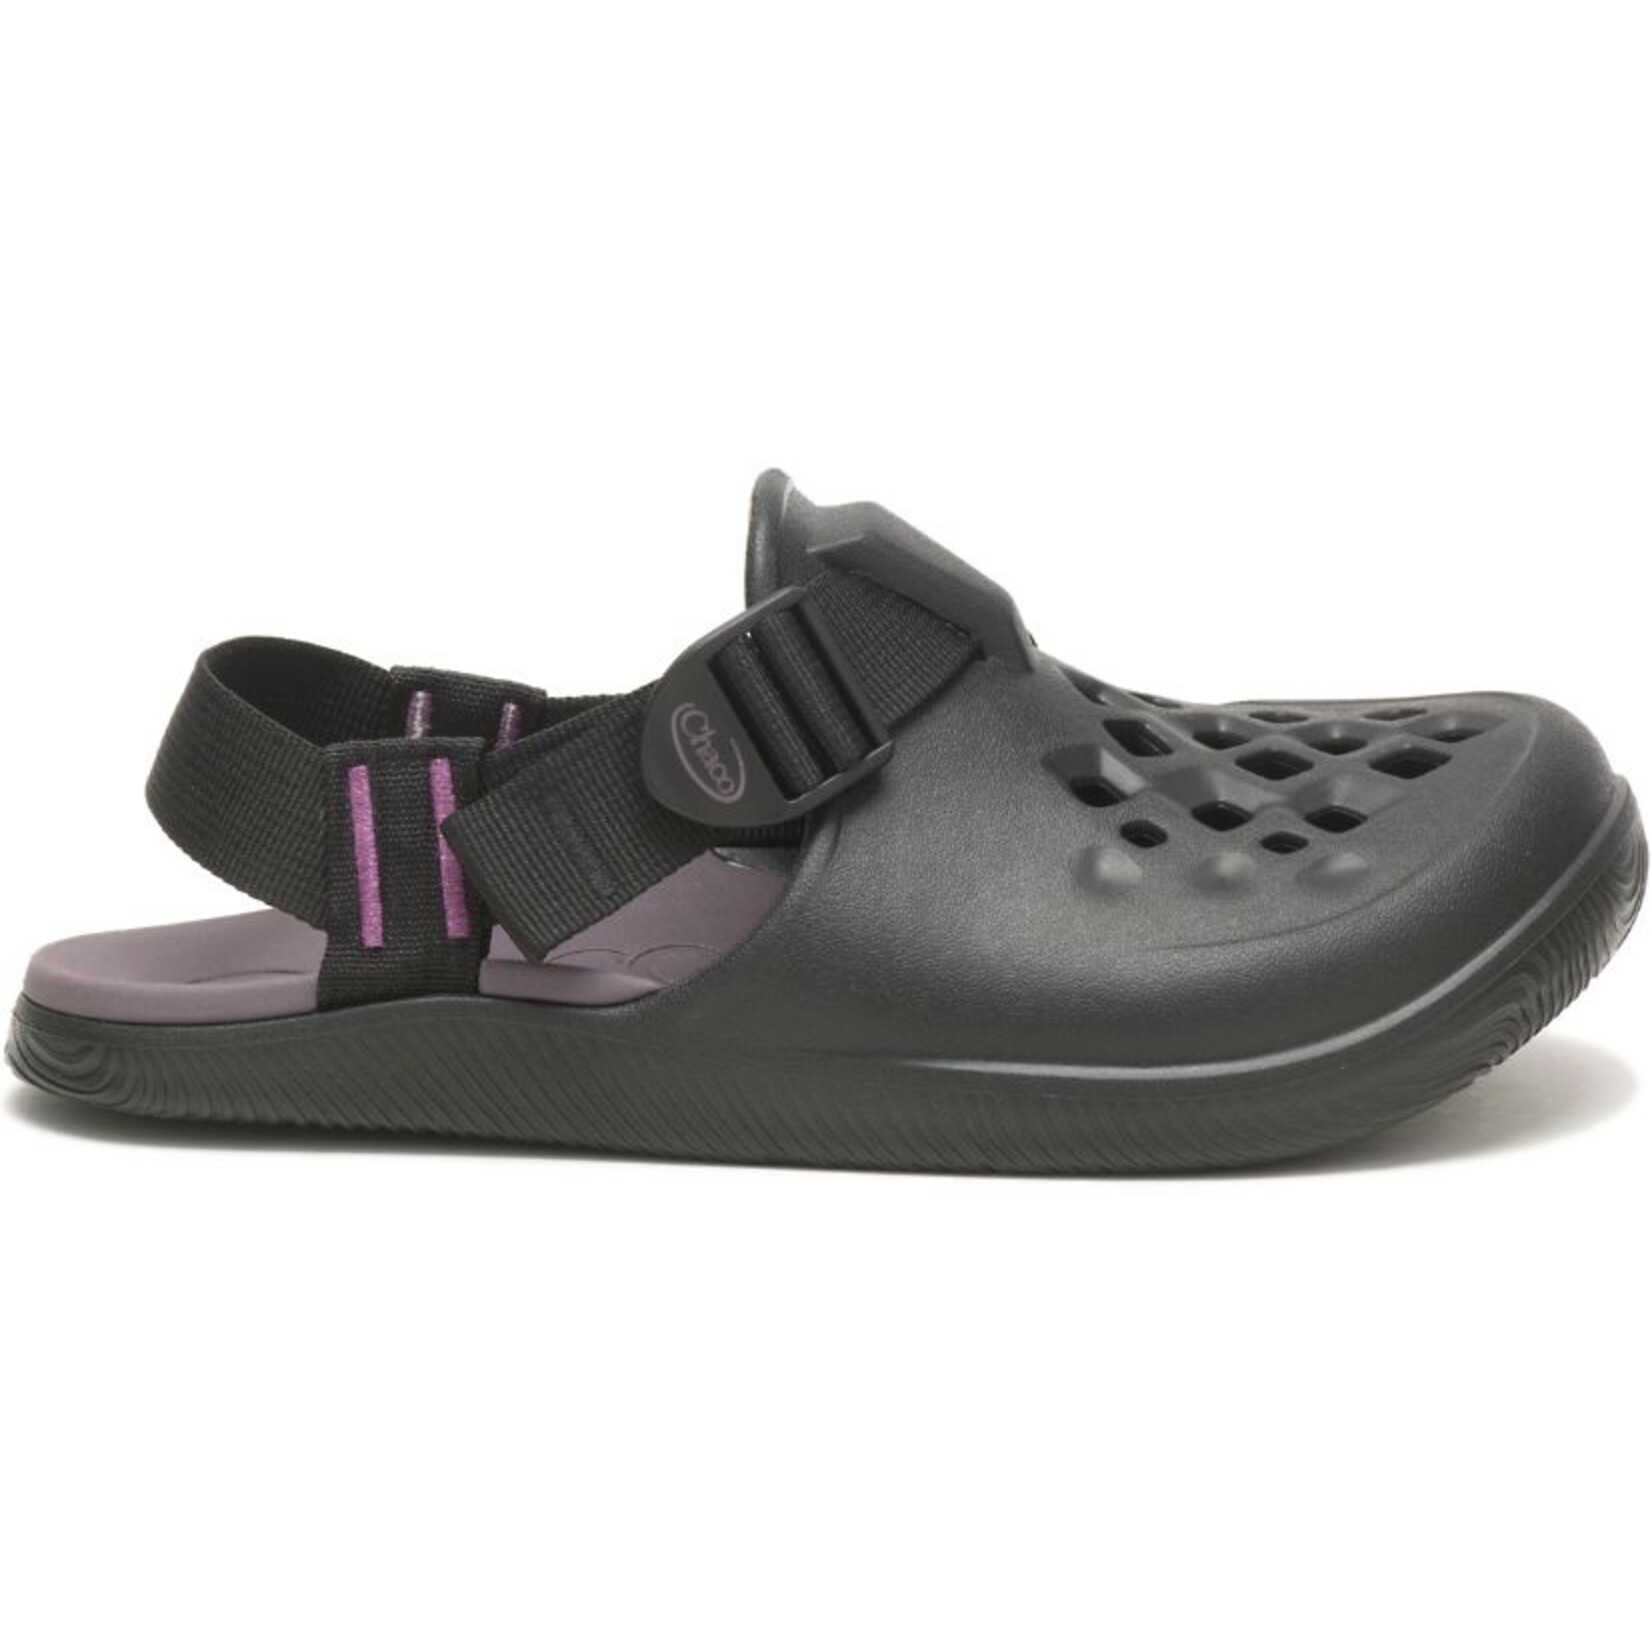 Chaco Chaco Women's Chillos Clog - Closeout